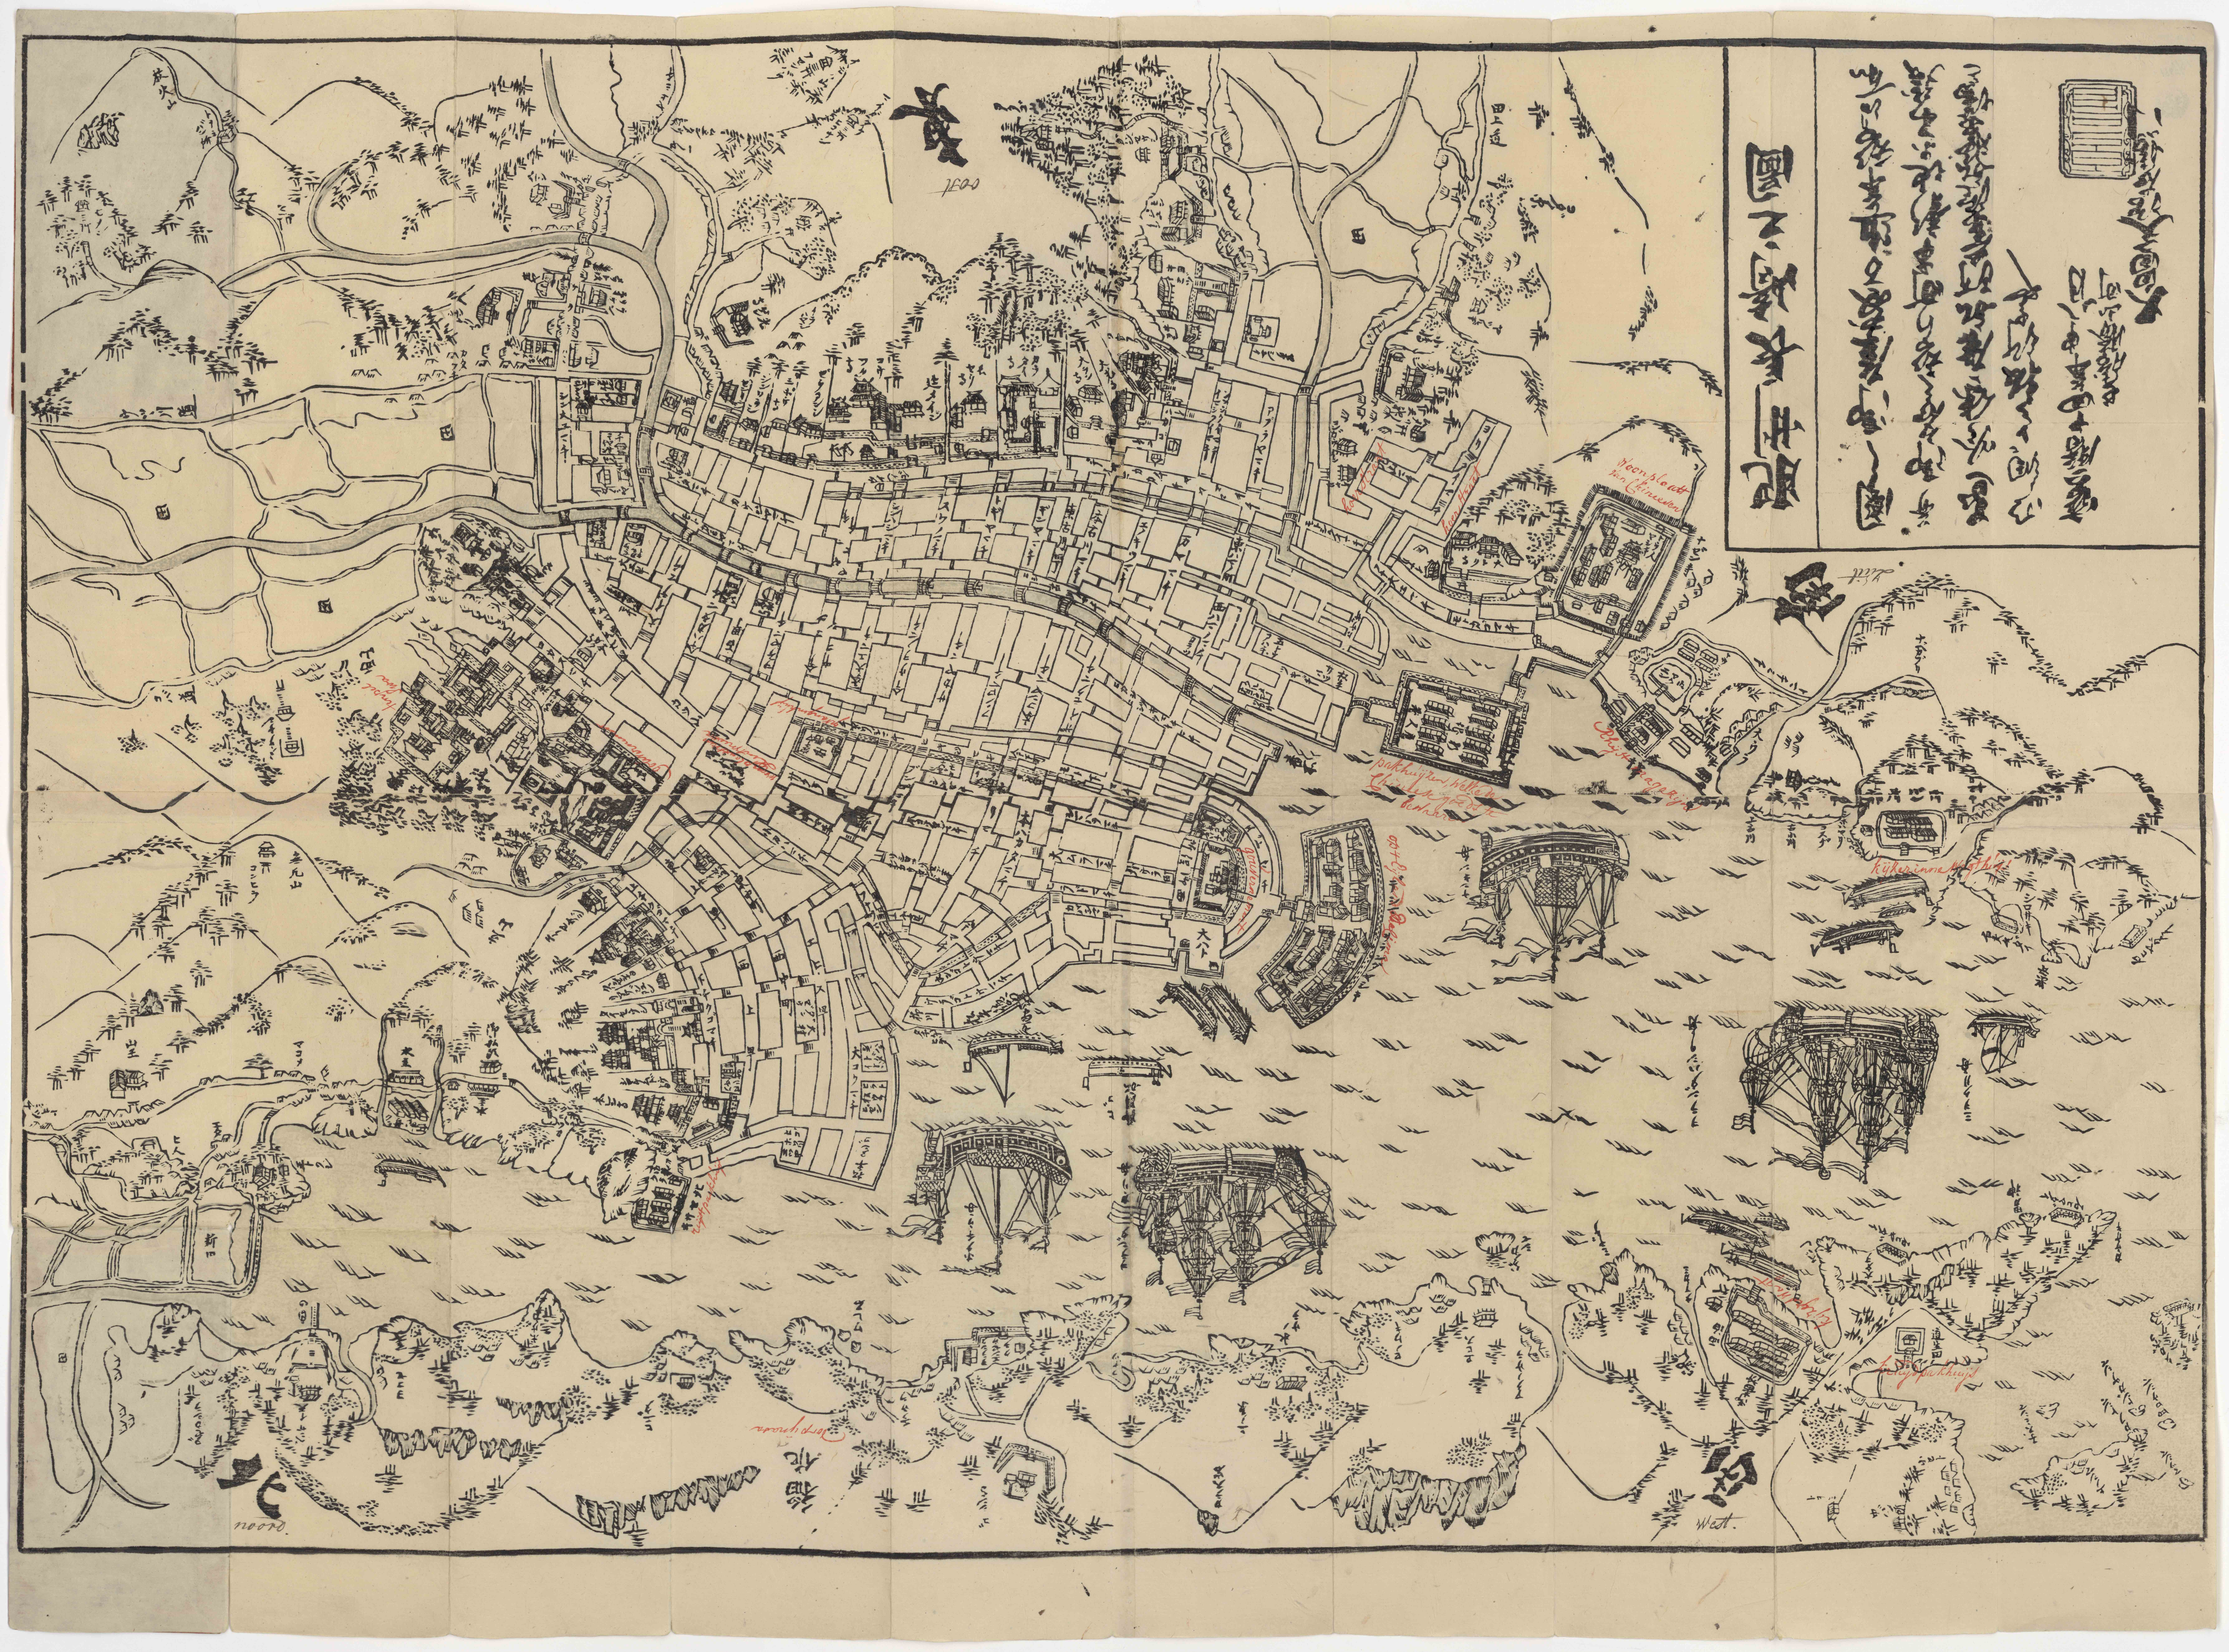 A Japanese map of Nagasaki city where north is to the right and the fan-shaped island Deshima (Dejima) in the middle. In the harbor, four large vessels from left to right, a Dutch, Chinese, Dutch, and Scandinavian ship. Thunberg’s notes in red pencil, similar to the notes in his Japanese books.